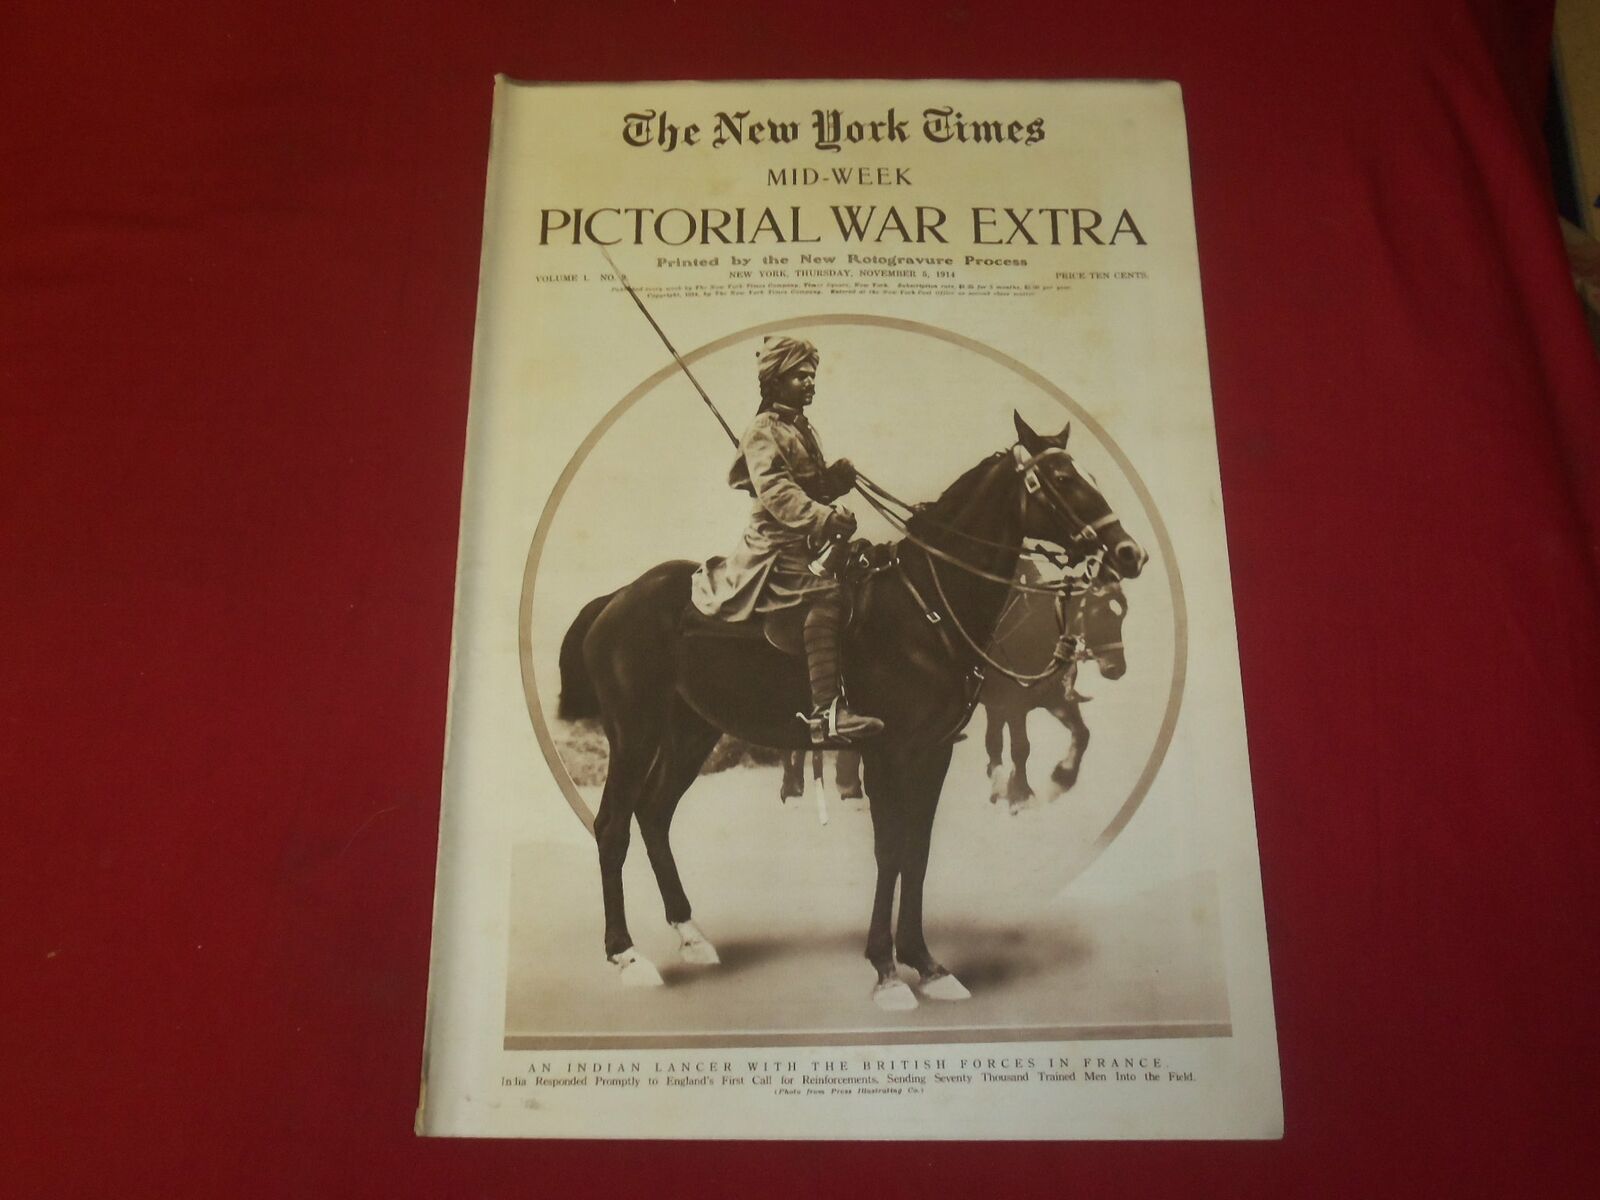 1914 NOVEMBER 5 NY TIMES PICTORIAL WAR EXTRA SECTION - INDIAN LANCER - NP 3936